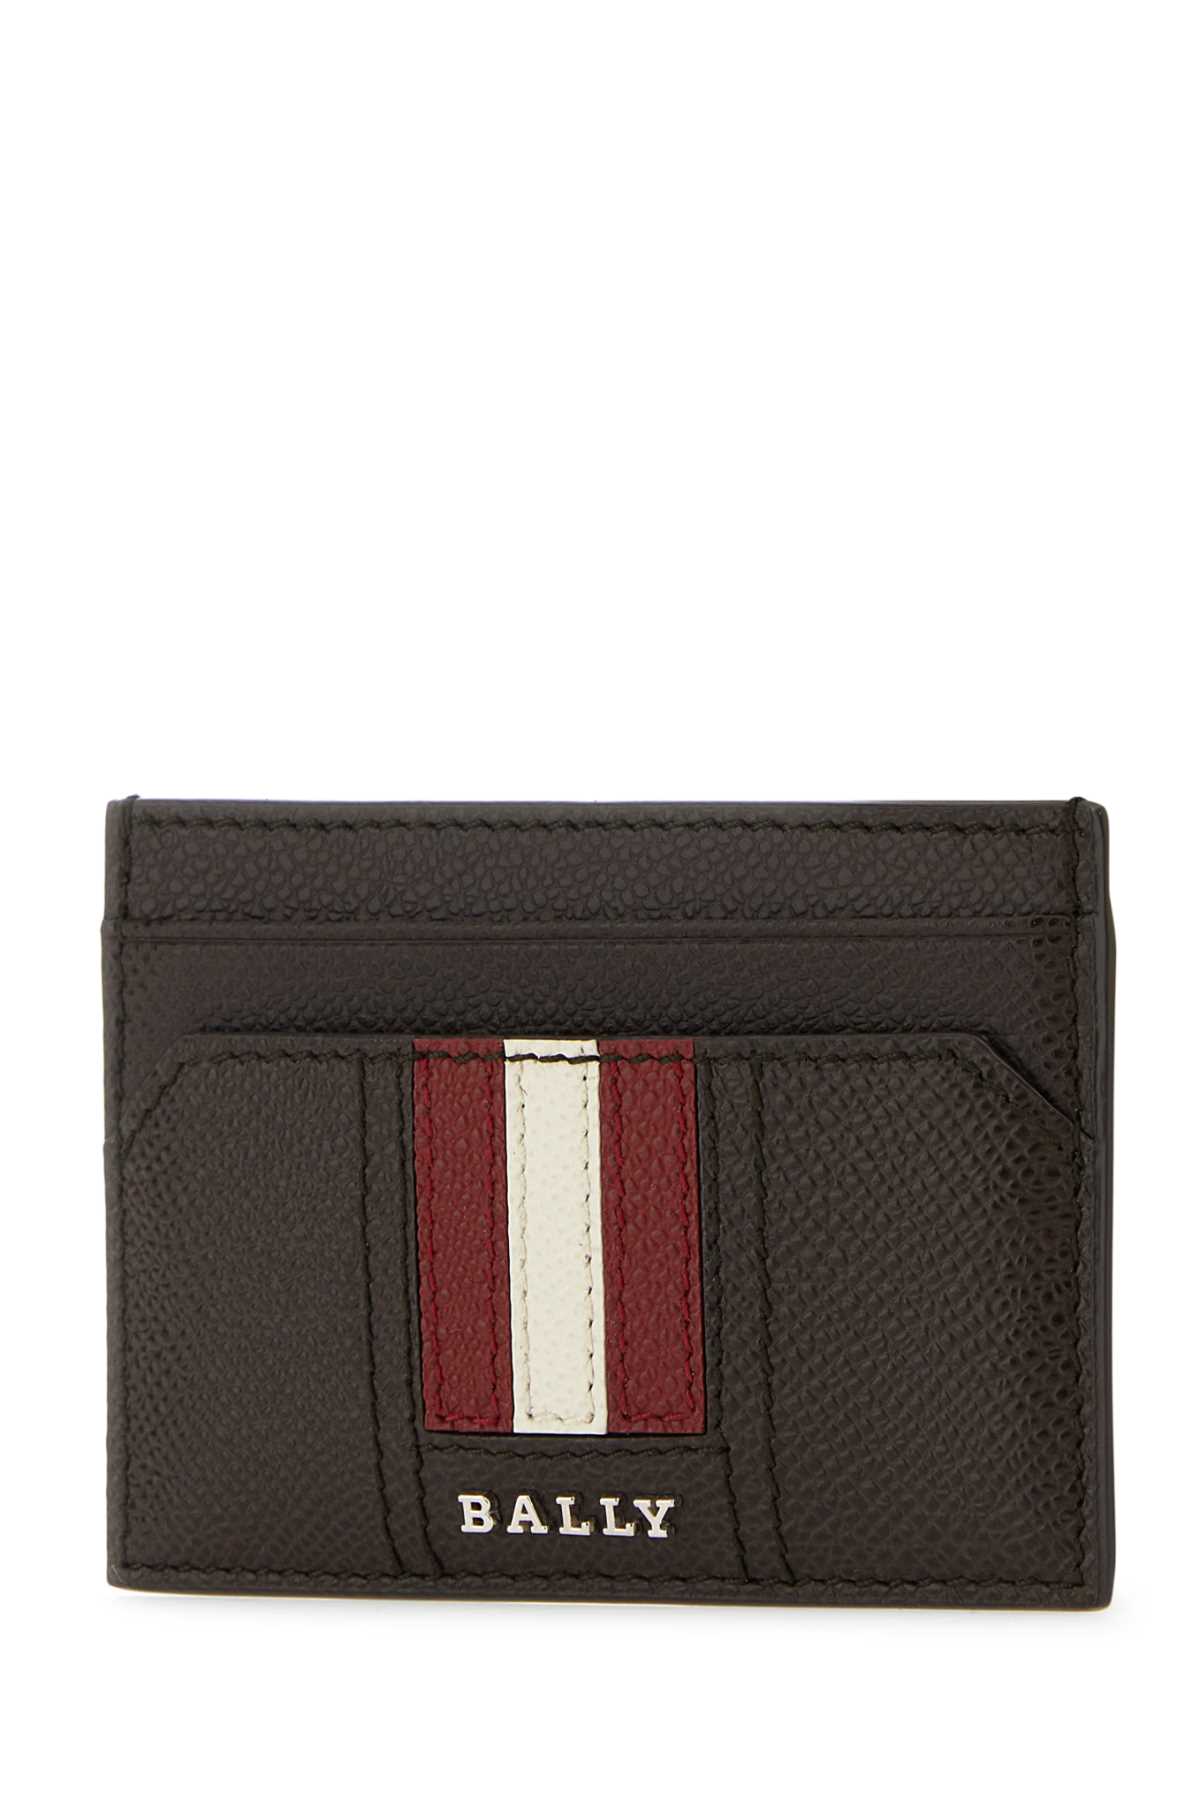 Shop Bally Chocolate Leather Thar Card Holder In F021